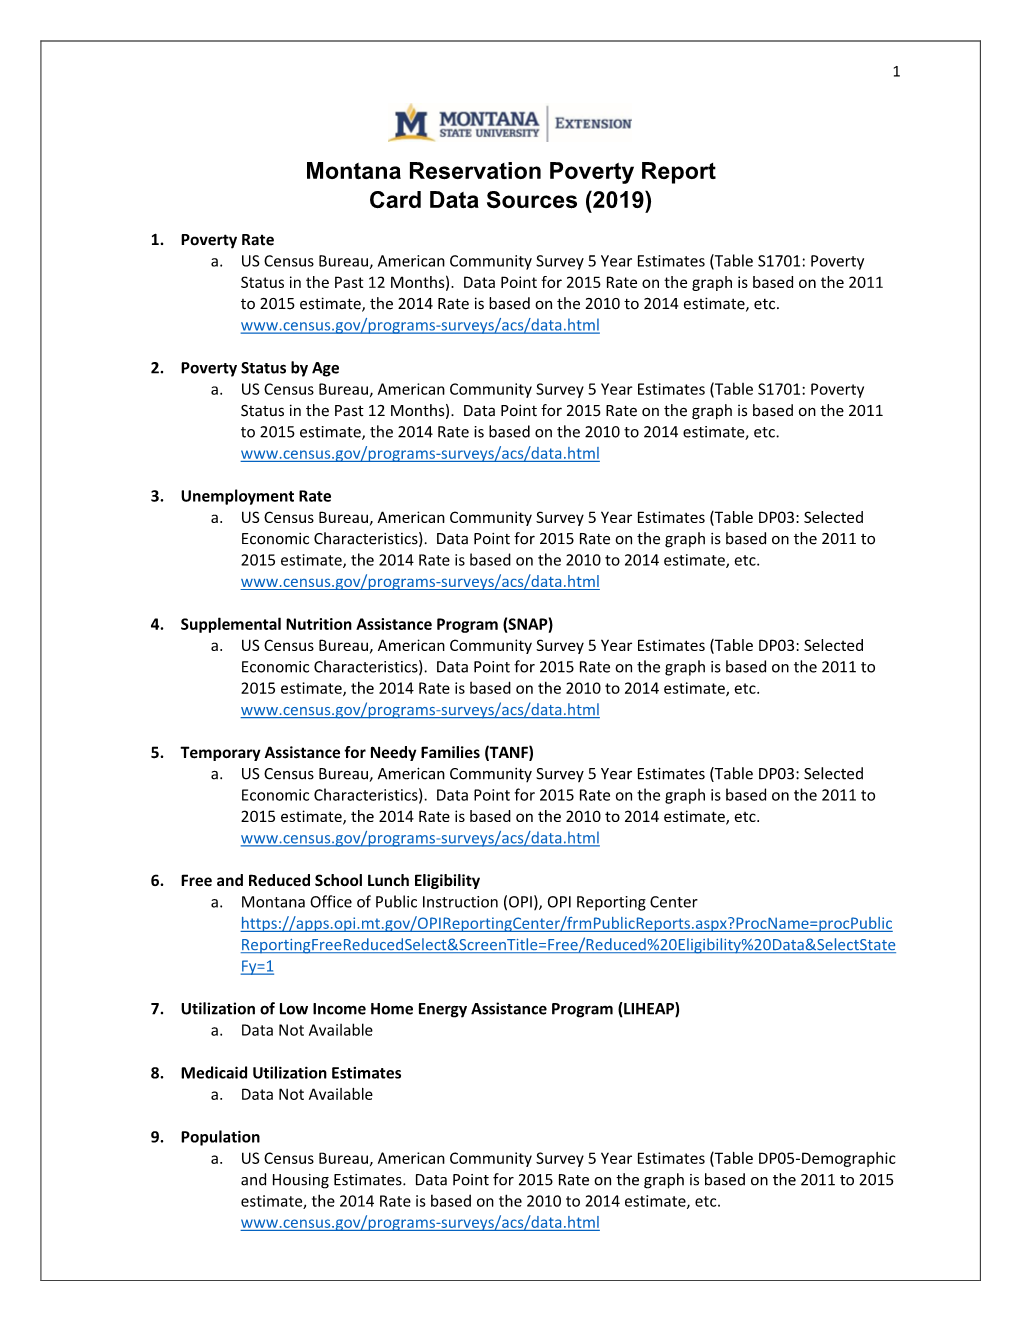 Montana Reservation Poverty Report Card Data Sources (2019) 1